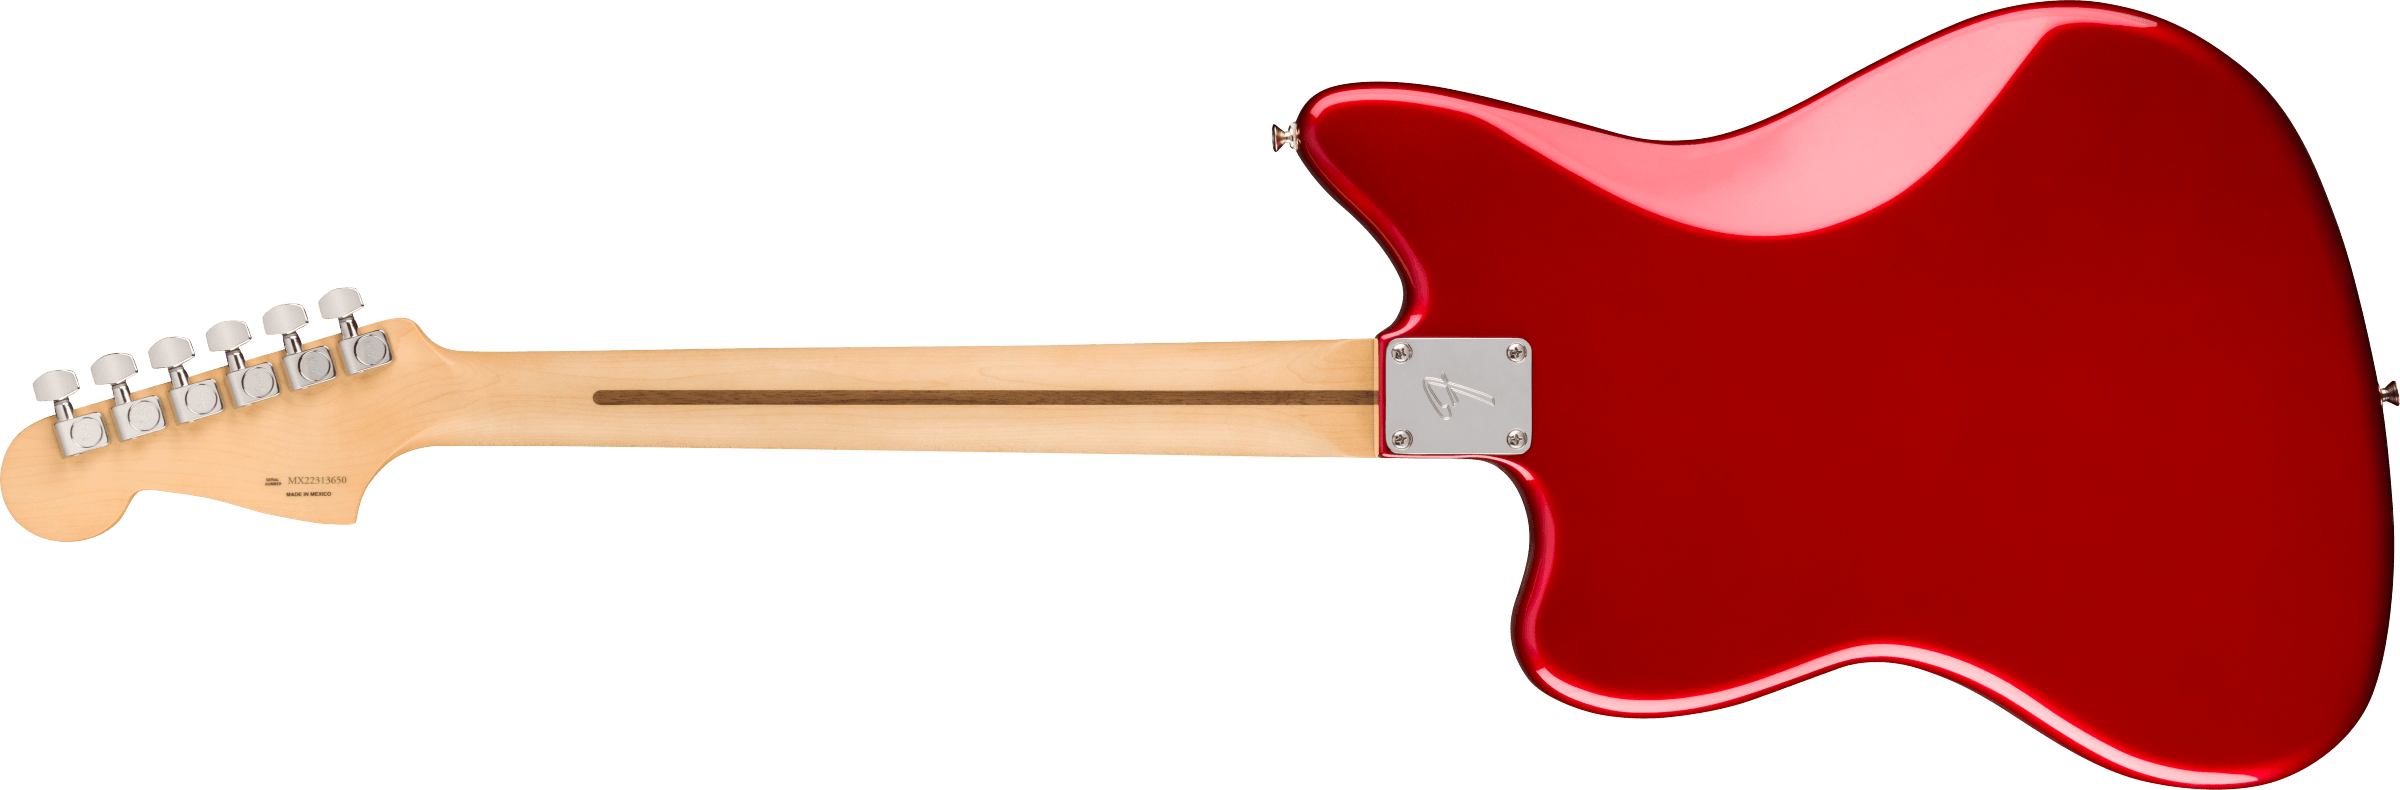 Fender Jazzmaster Player Hh Mex 2023 Trem 2h Pf - Candy Apple Red - Retro rock electric guitar - Variation 1